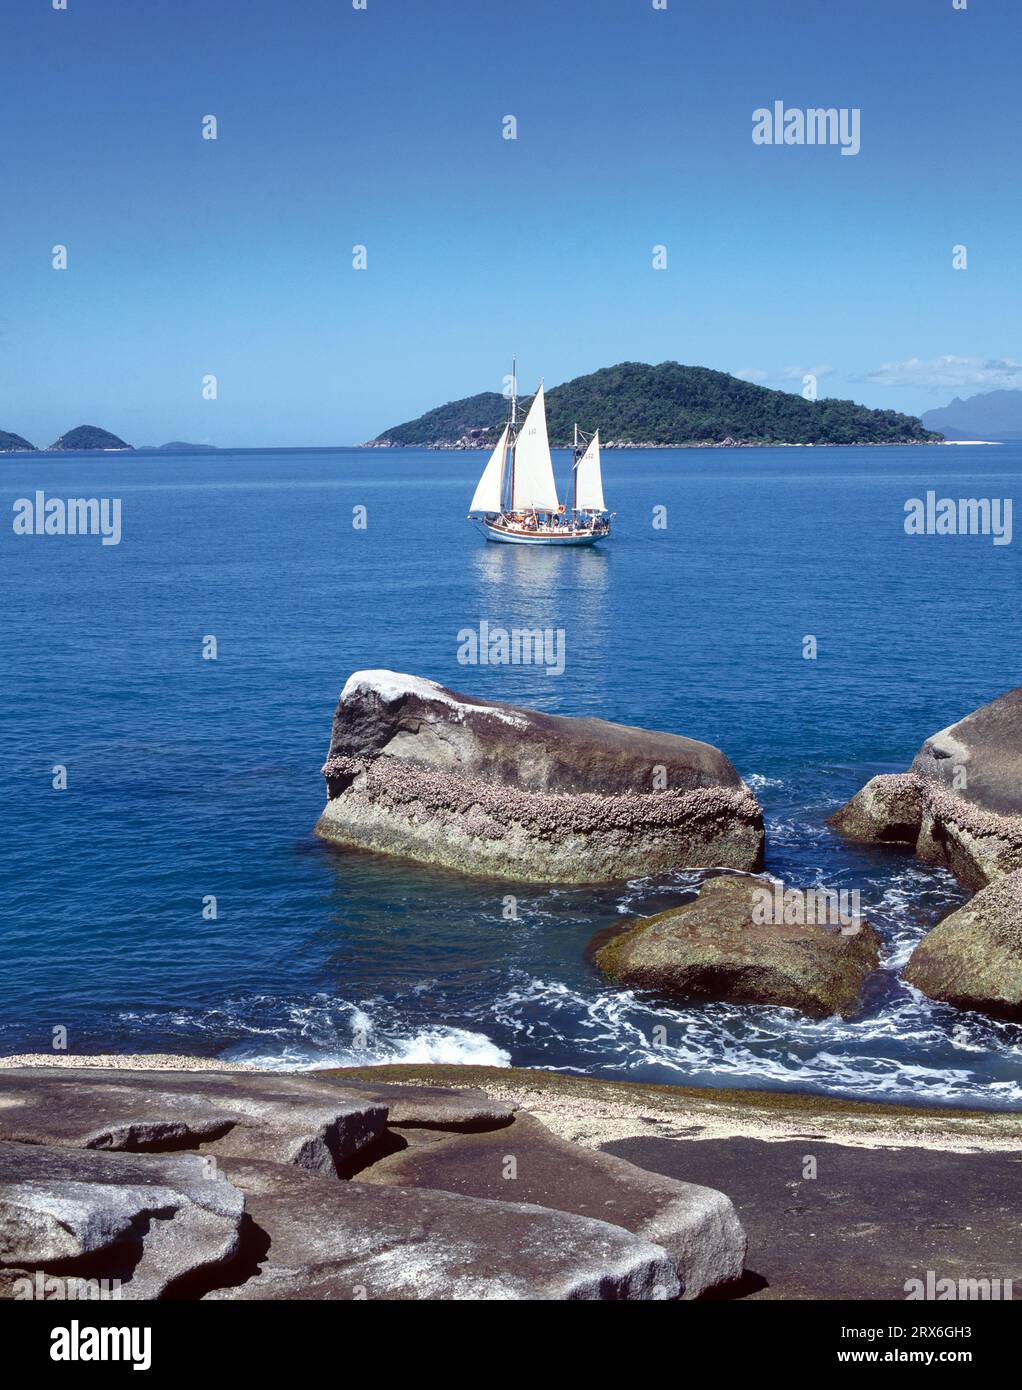 Australia. Queensland. Great Barrier Reef.  Family Islands. Coast view with Ise Pearl Sailboat. Stock Photo